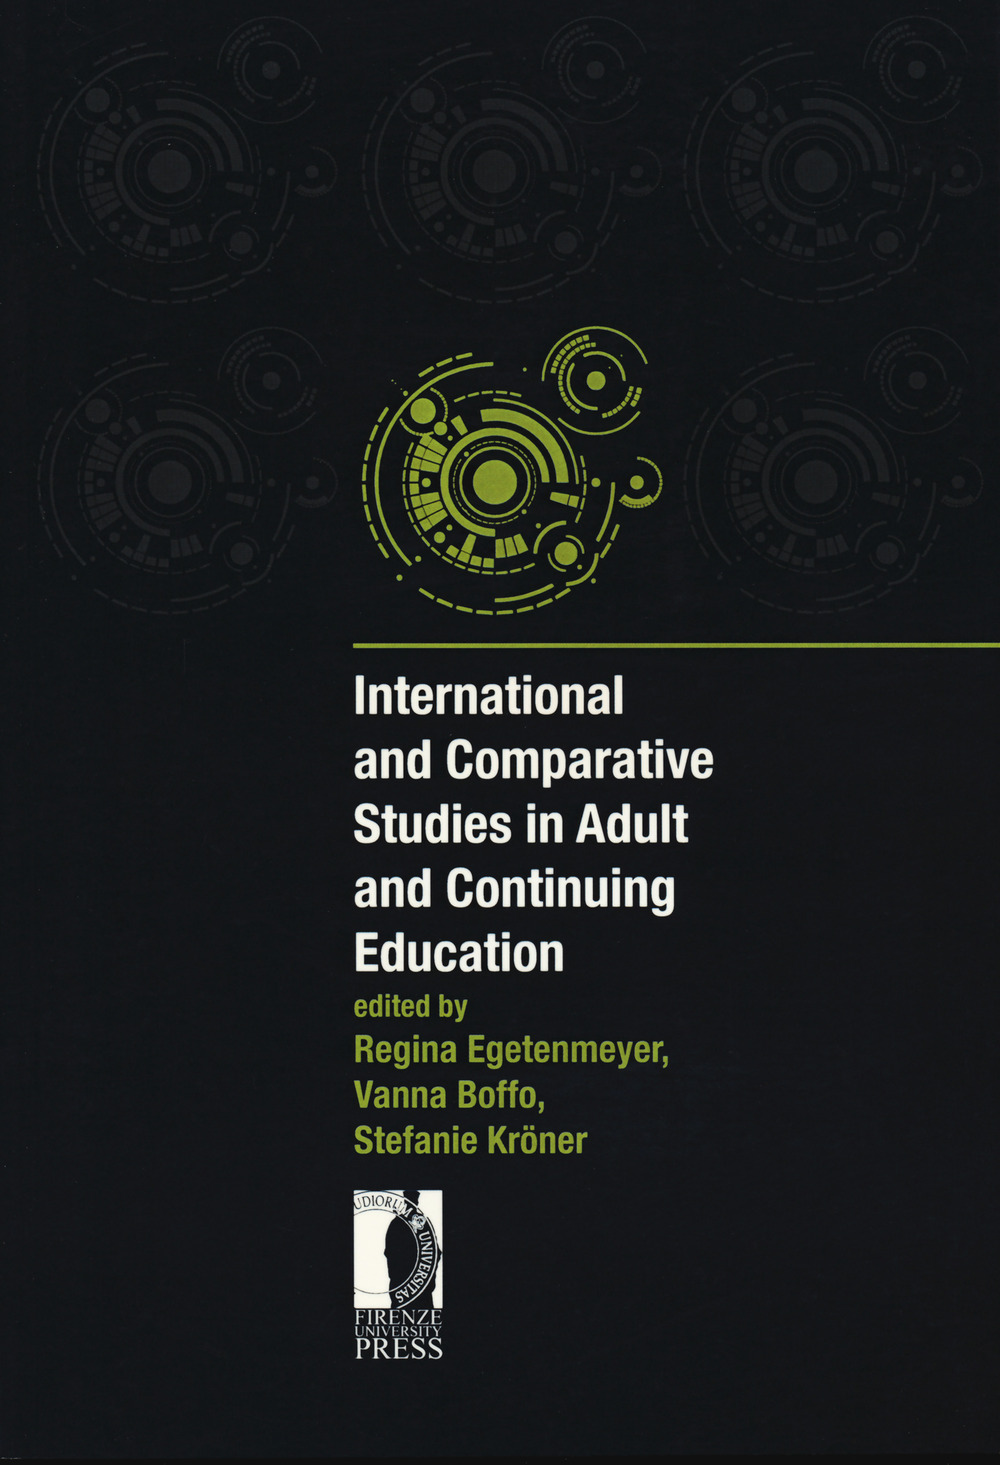 International and comparative studies in adult and continuing education